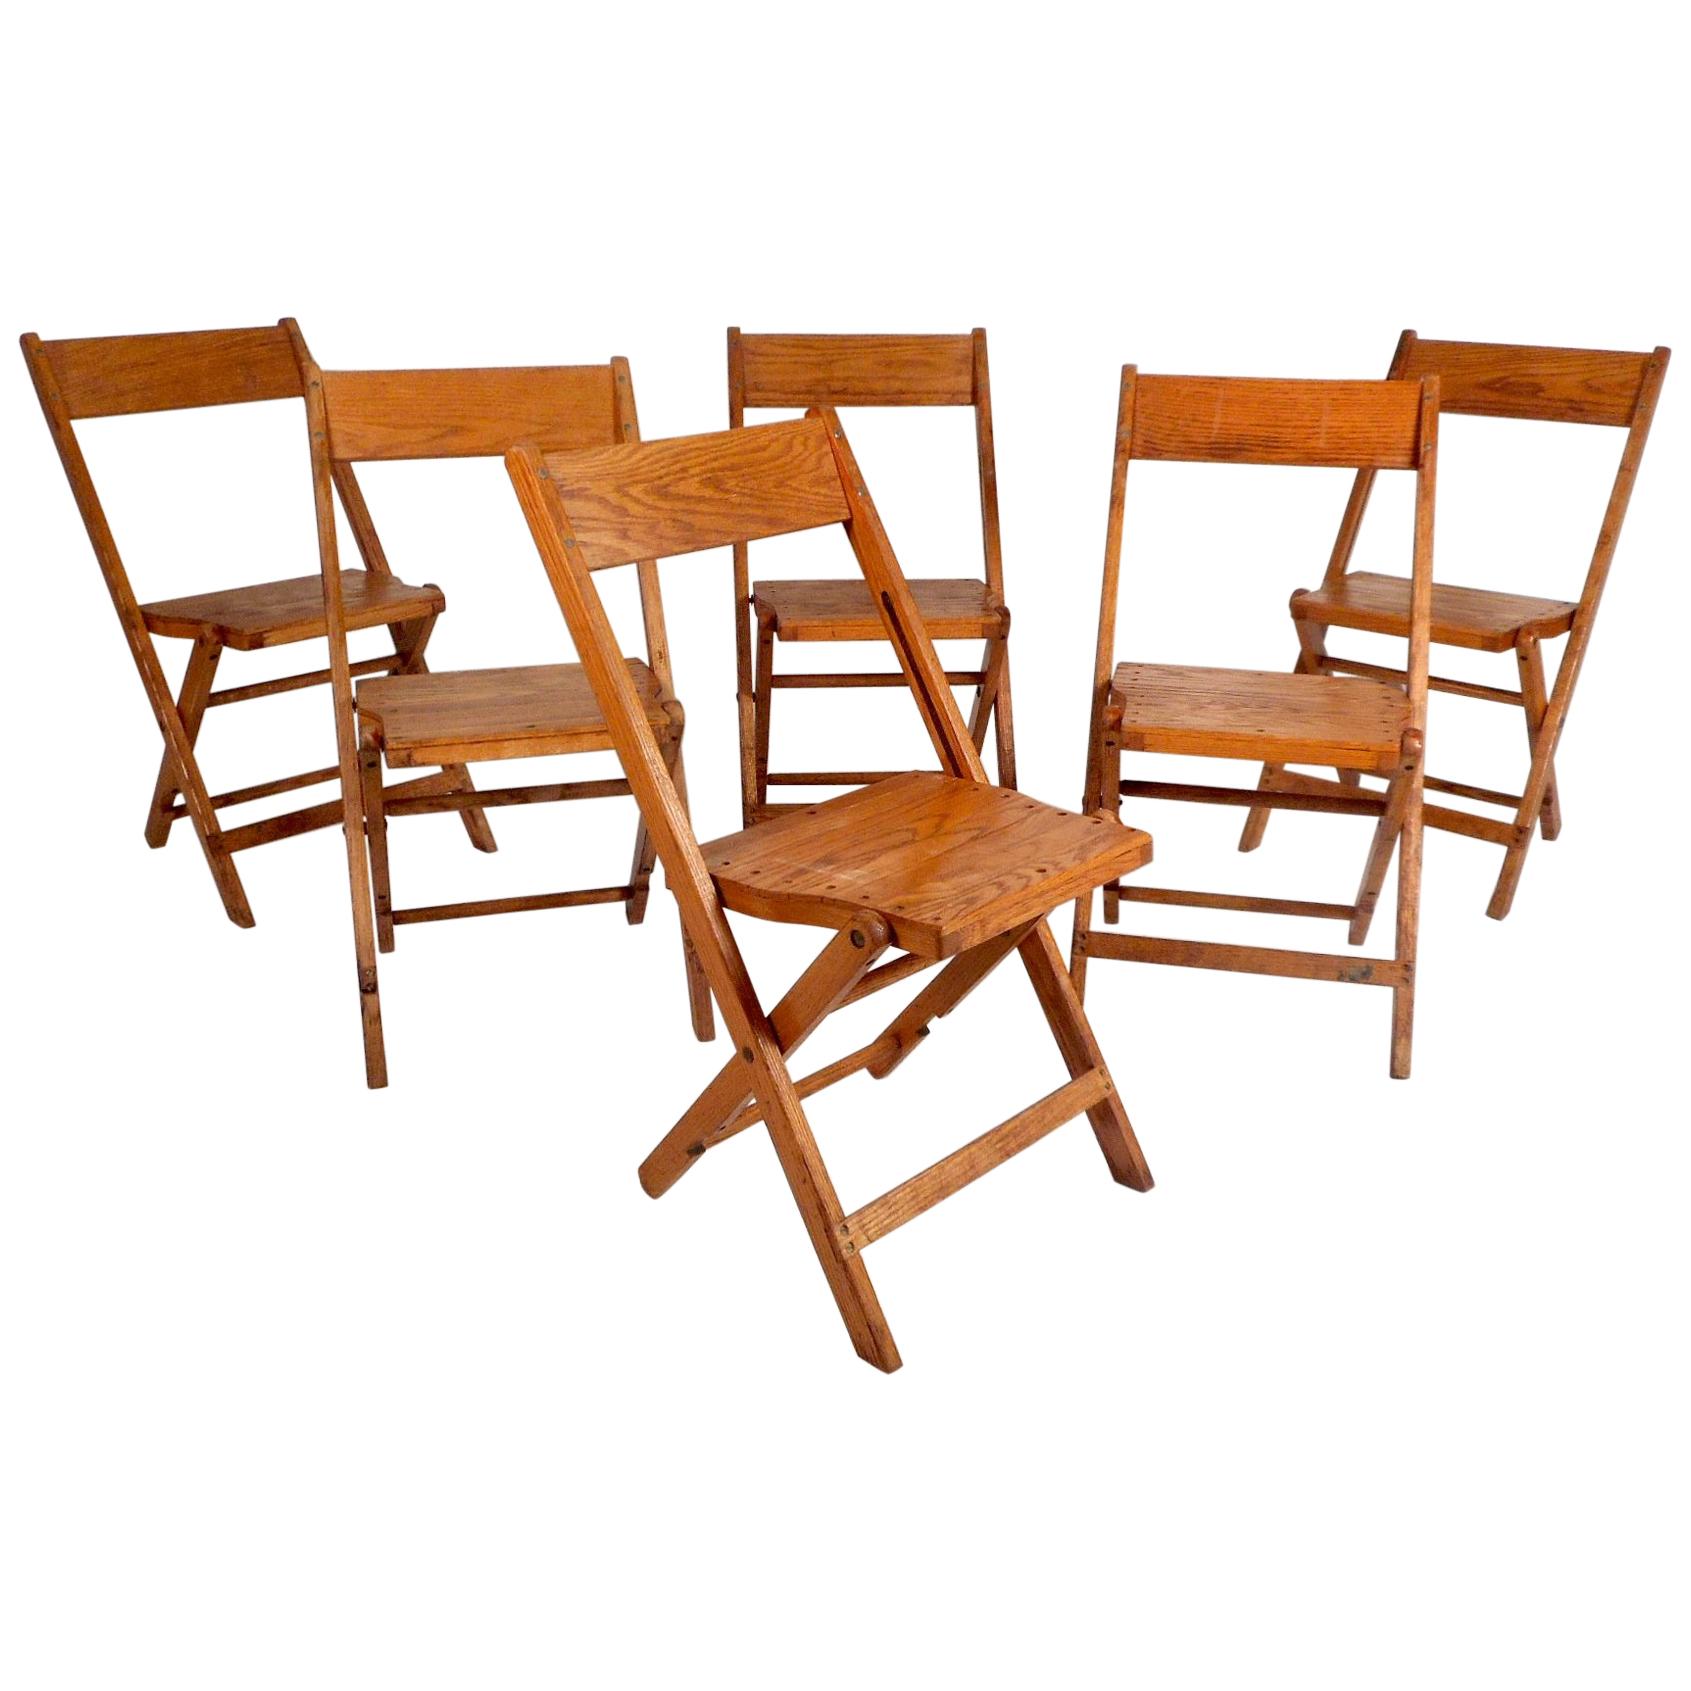 Six Mid-Century Modern Oak Folding Chairs by Snyder Chair Co.